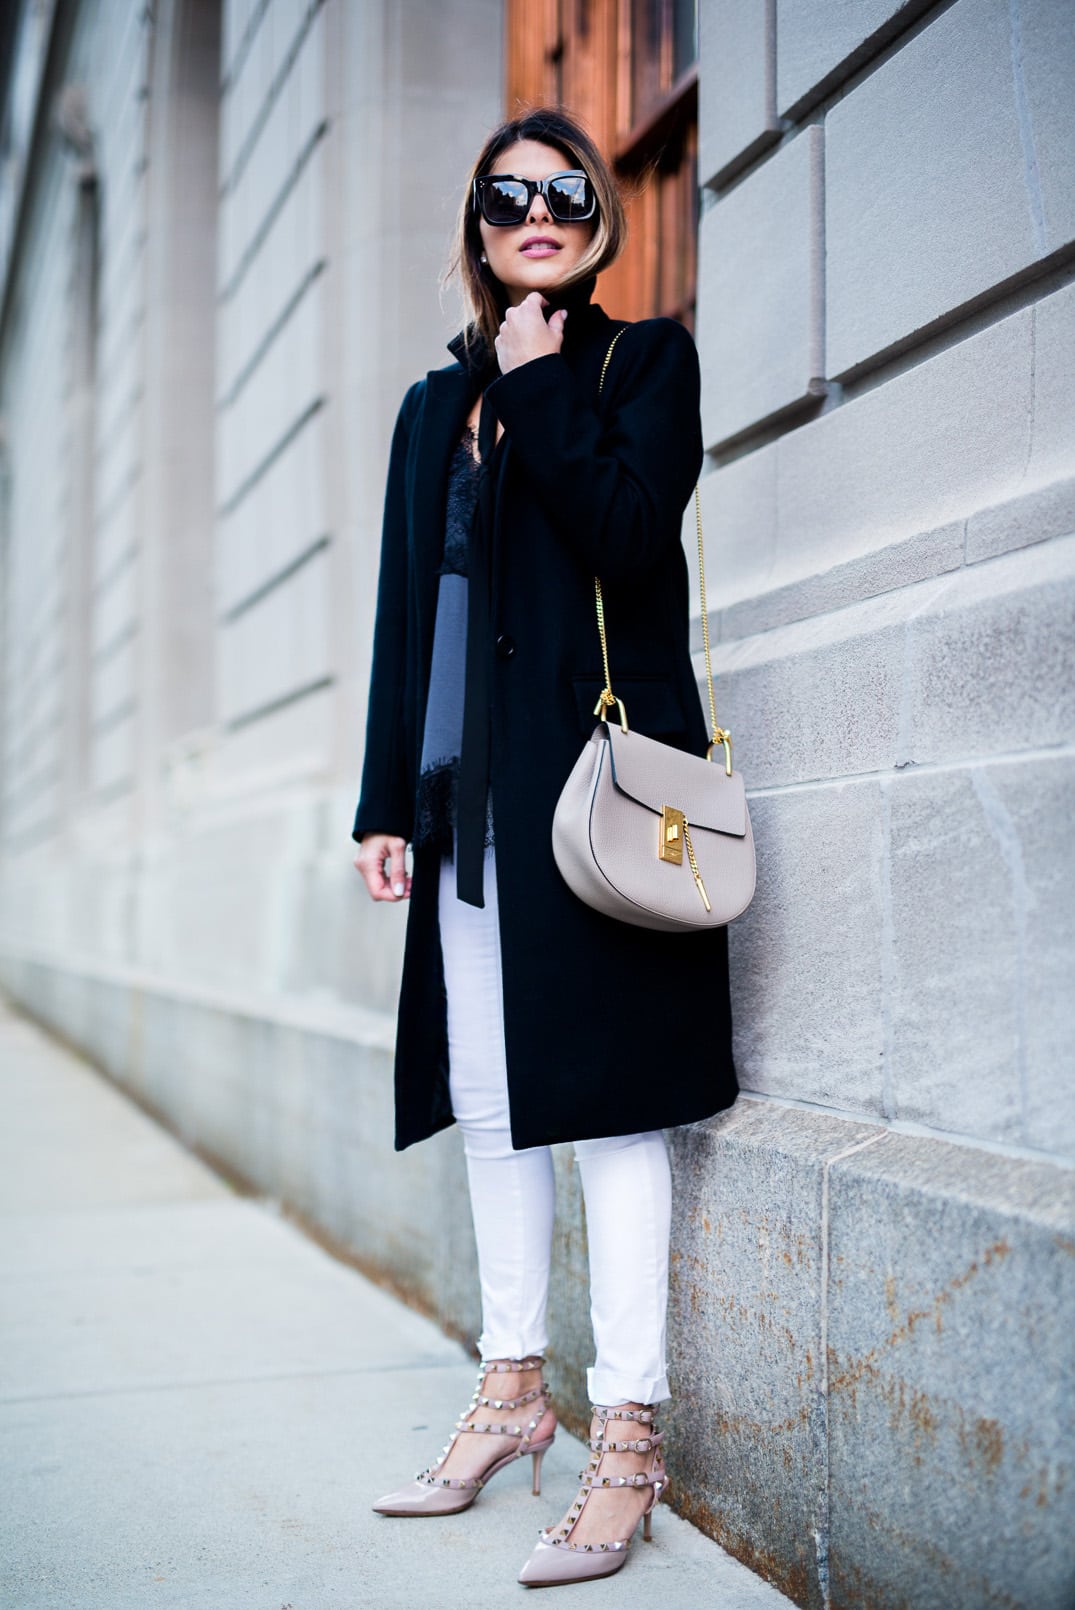 Pam Hetlinger, The Girl From Panama wearing a Mango Lace Top, Zady Black Coat, Valentino Rockstud Sandals, Reiss White jeans and Chloe Drew Bag.